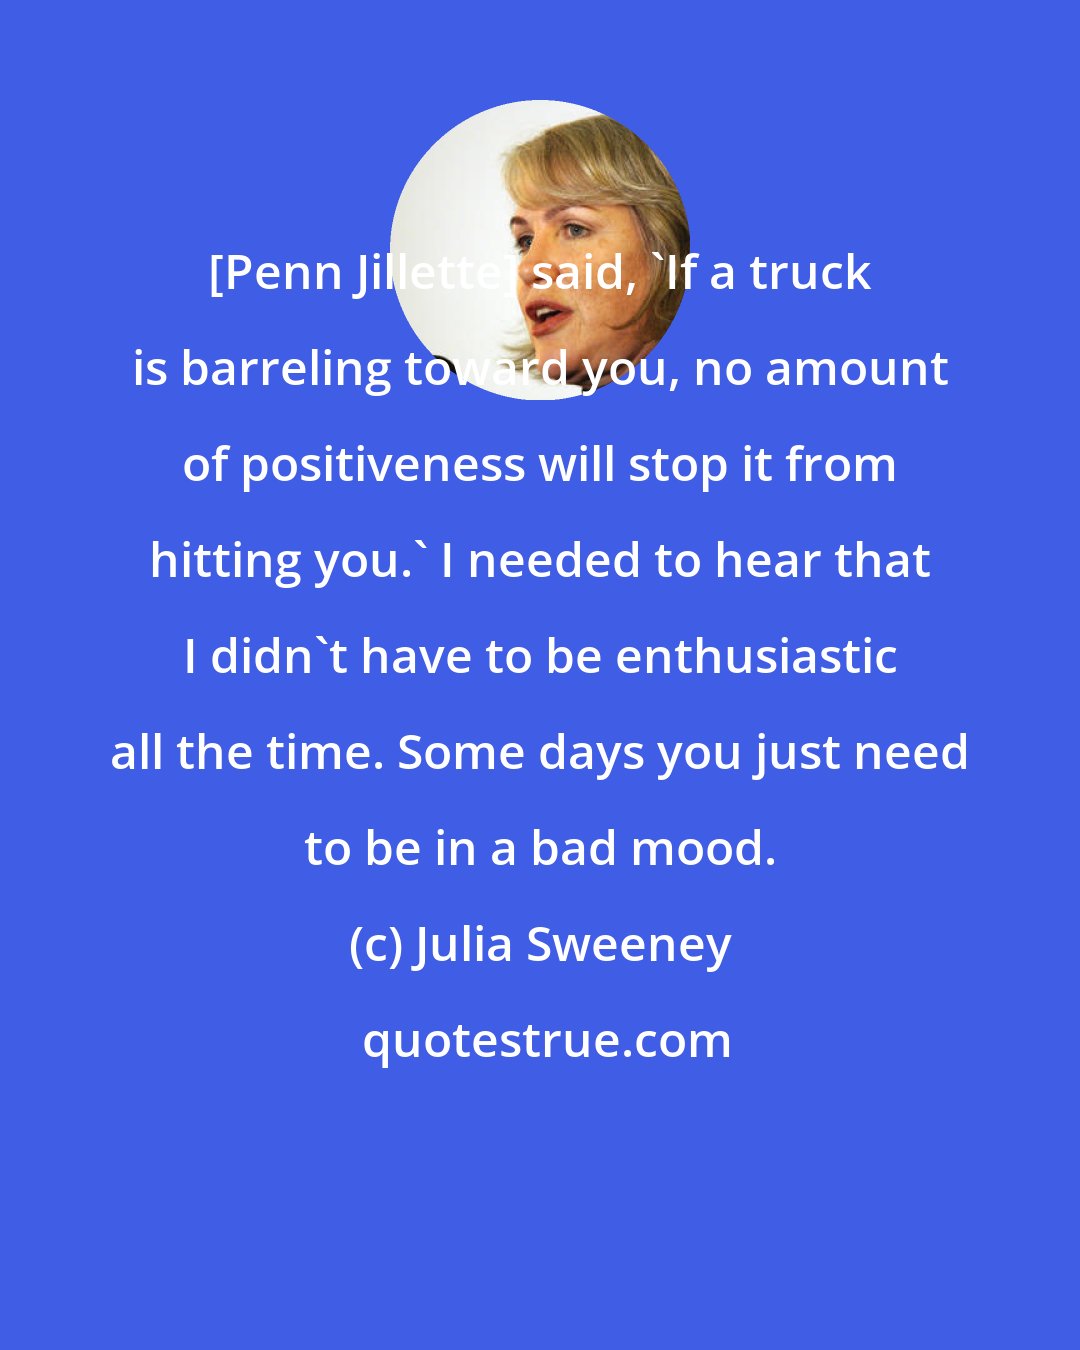 Julia Sweeney: [Penn Jillette] said, 'If a truck is barreling toward you, no amount of positiveness will stop it from hitting you.' I needed to hear that I didn't have to be enthusiastic all the time. Some days you just need to be in a bad mood.